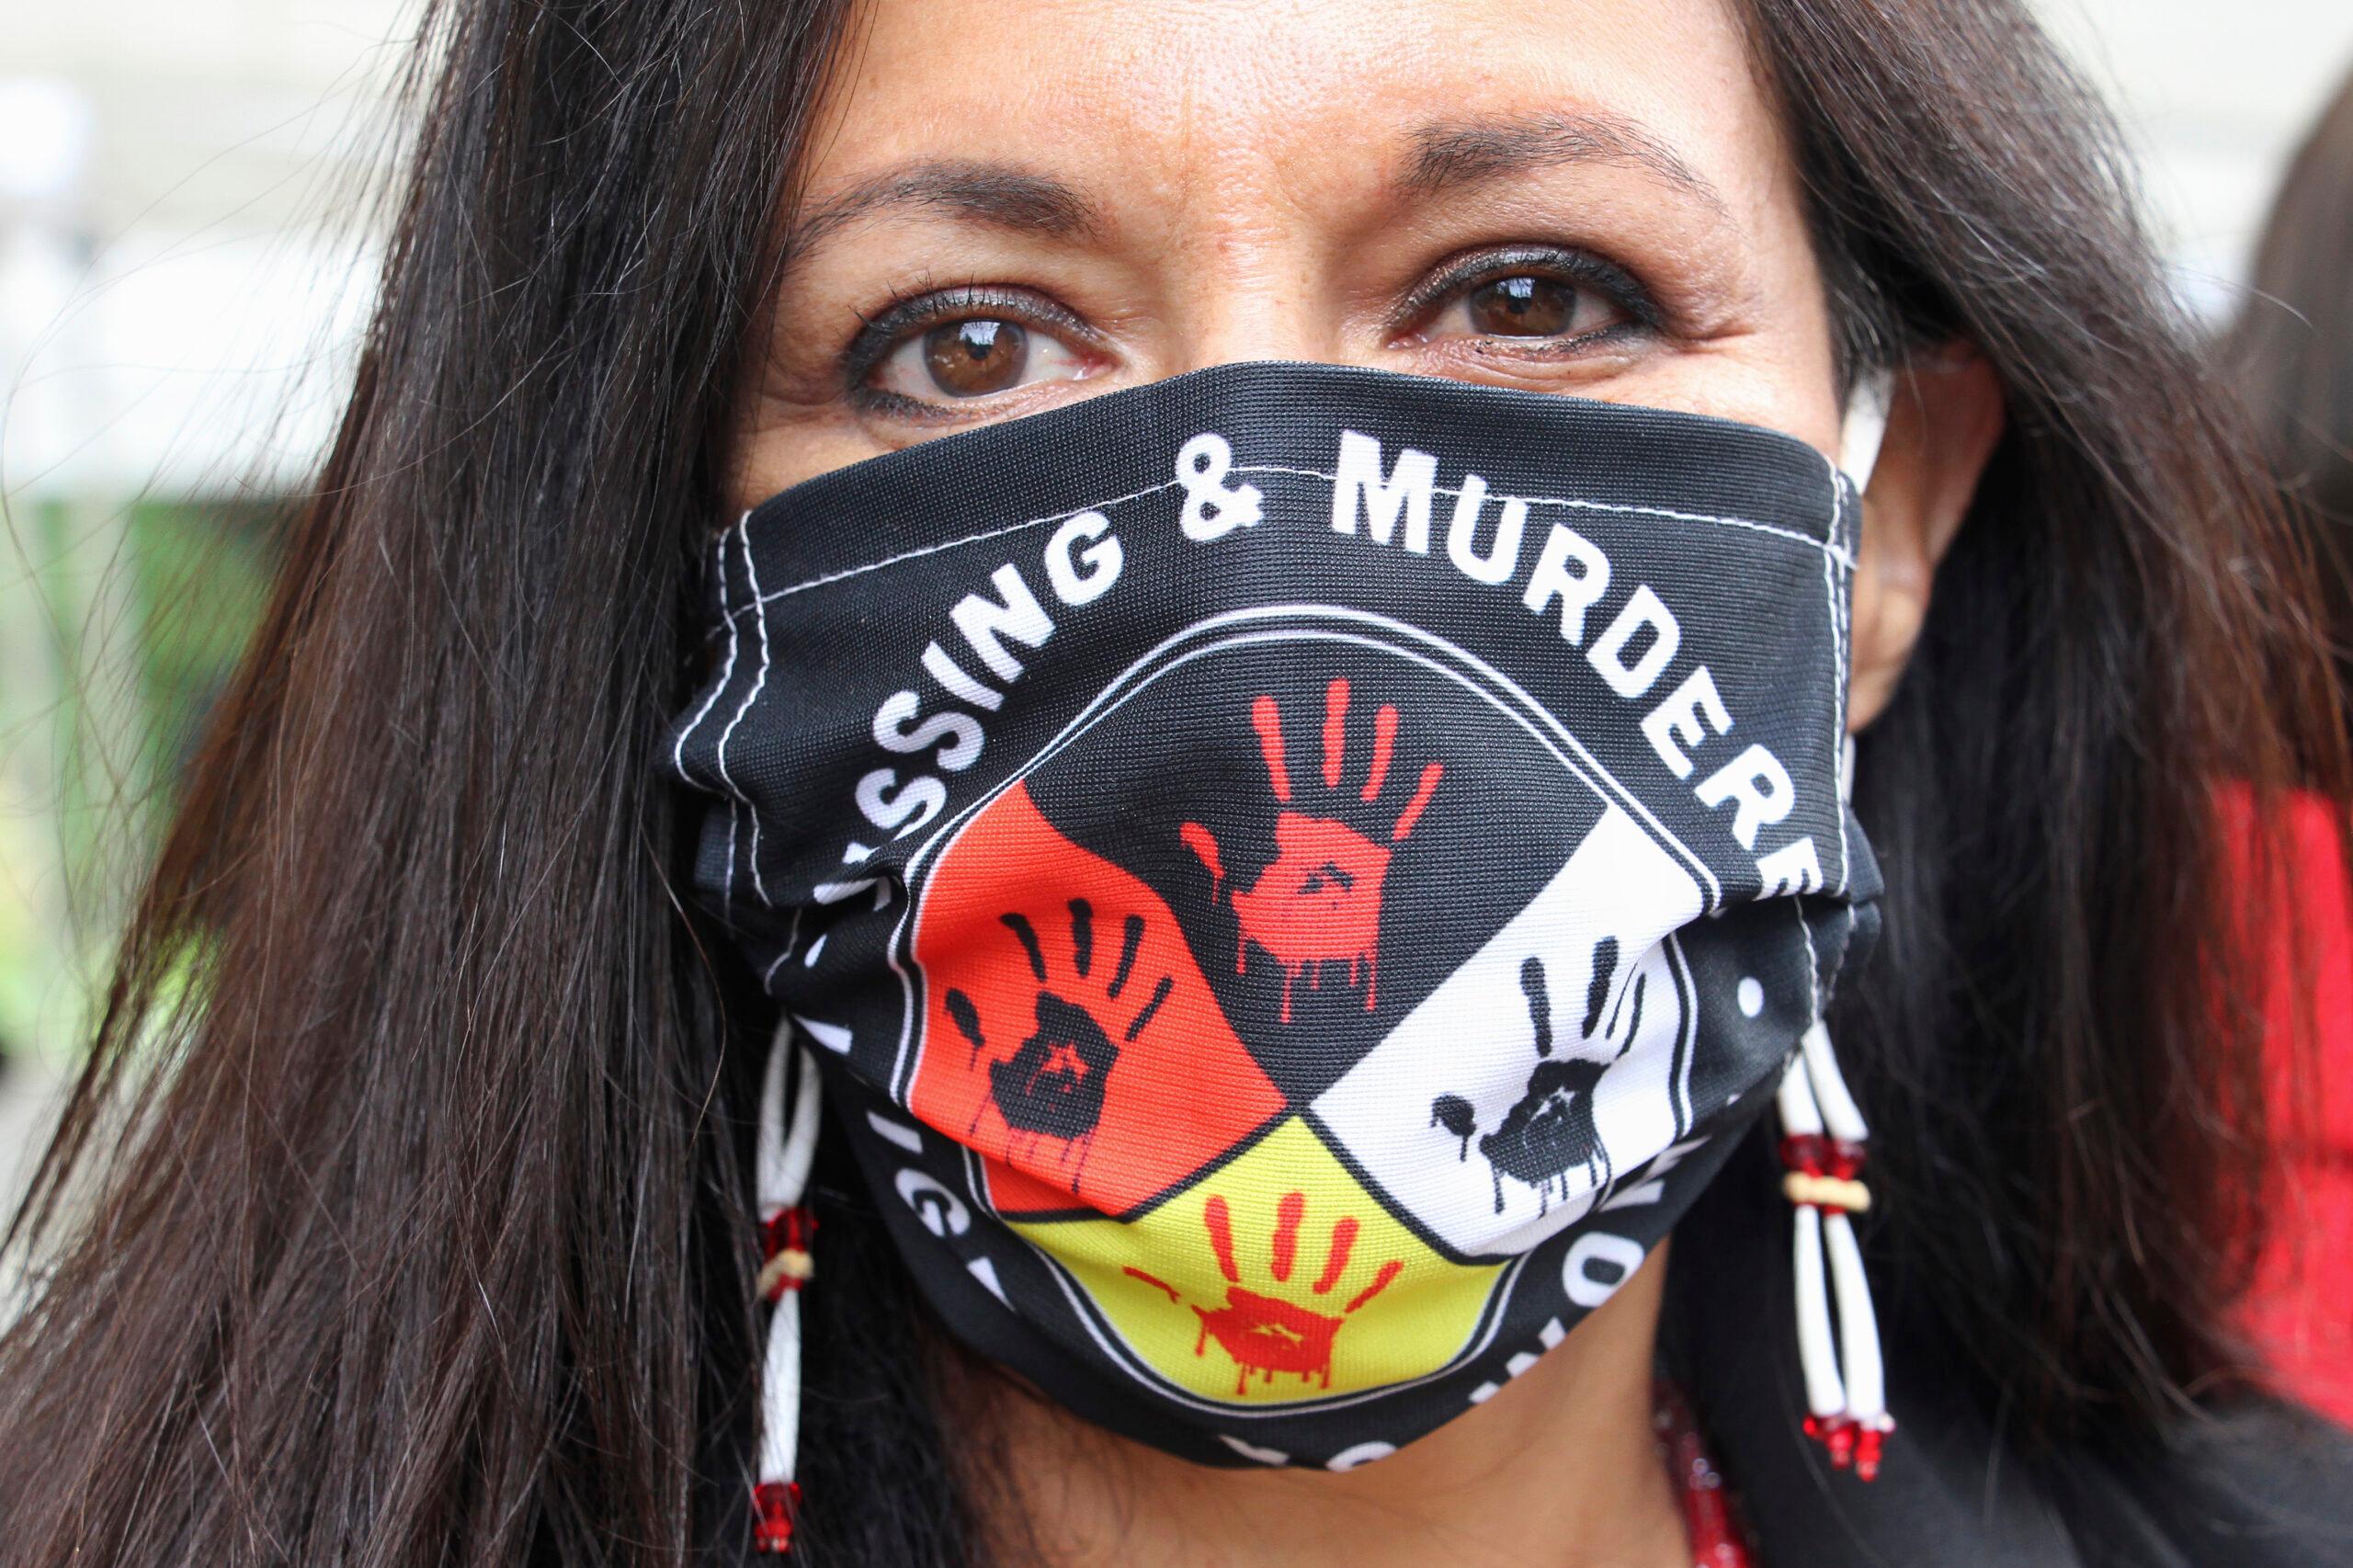 MISSING-MURDERED-INDIGENOUS-RELATICES-MMIR